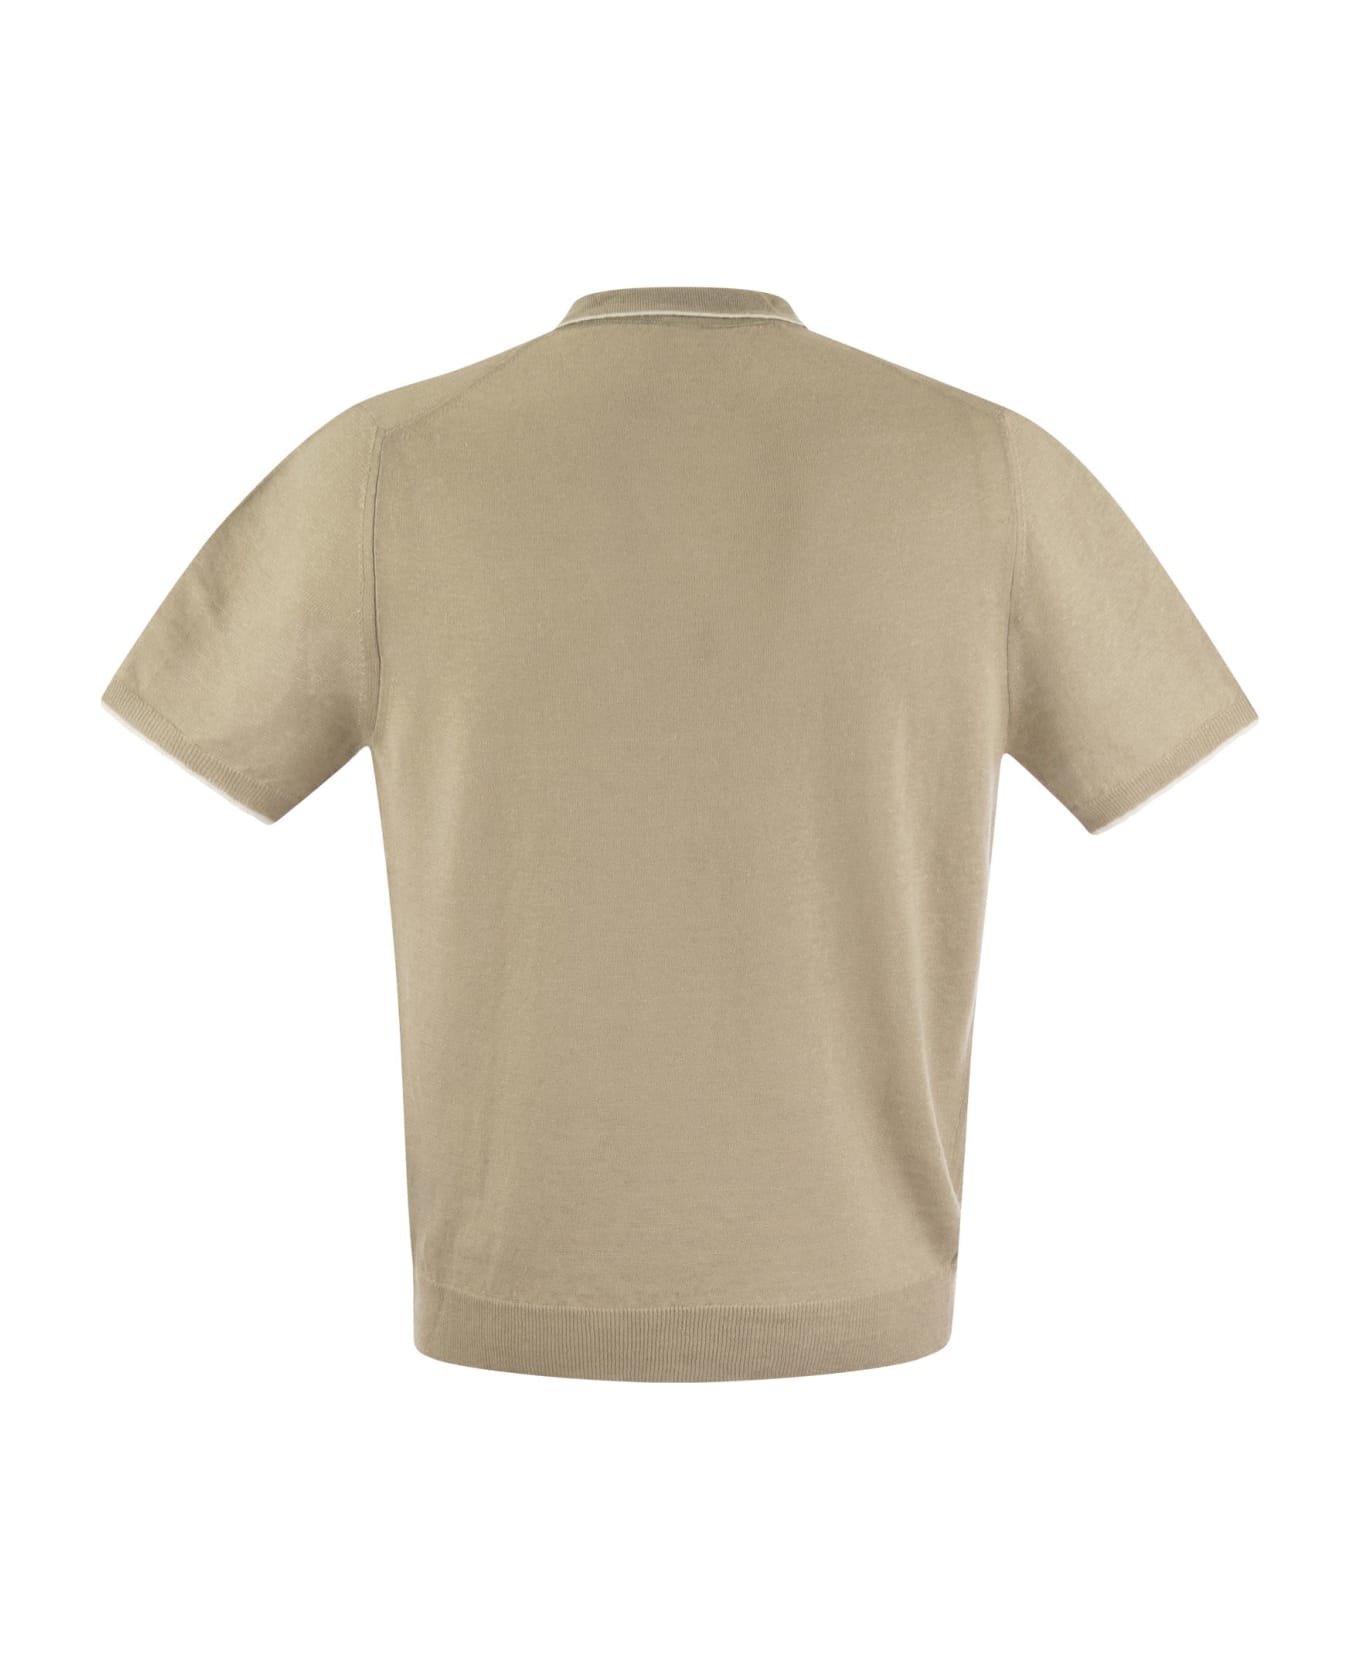 Fedeli Polo Shirt With Open Collar In Linen And Cotton - Beige ポロシャツ